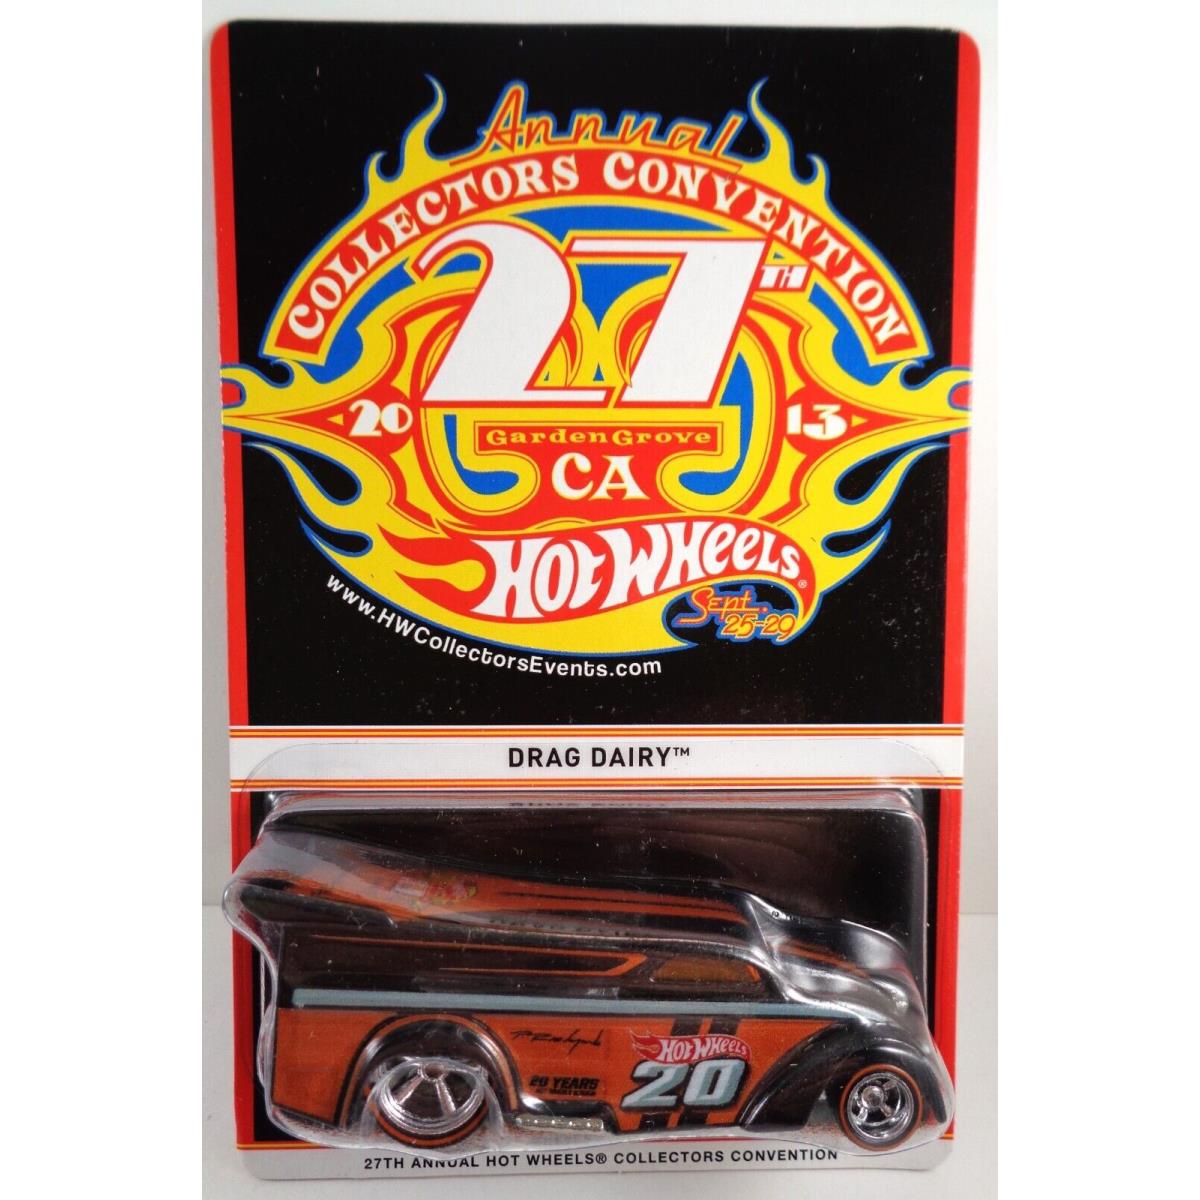 Hot Wheels 27TH Annual Collectors Convention Dinner Car Drag Dairy